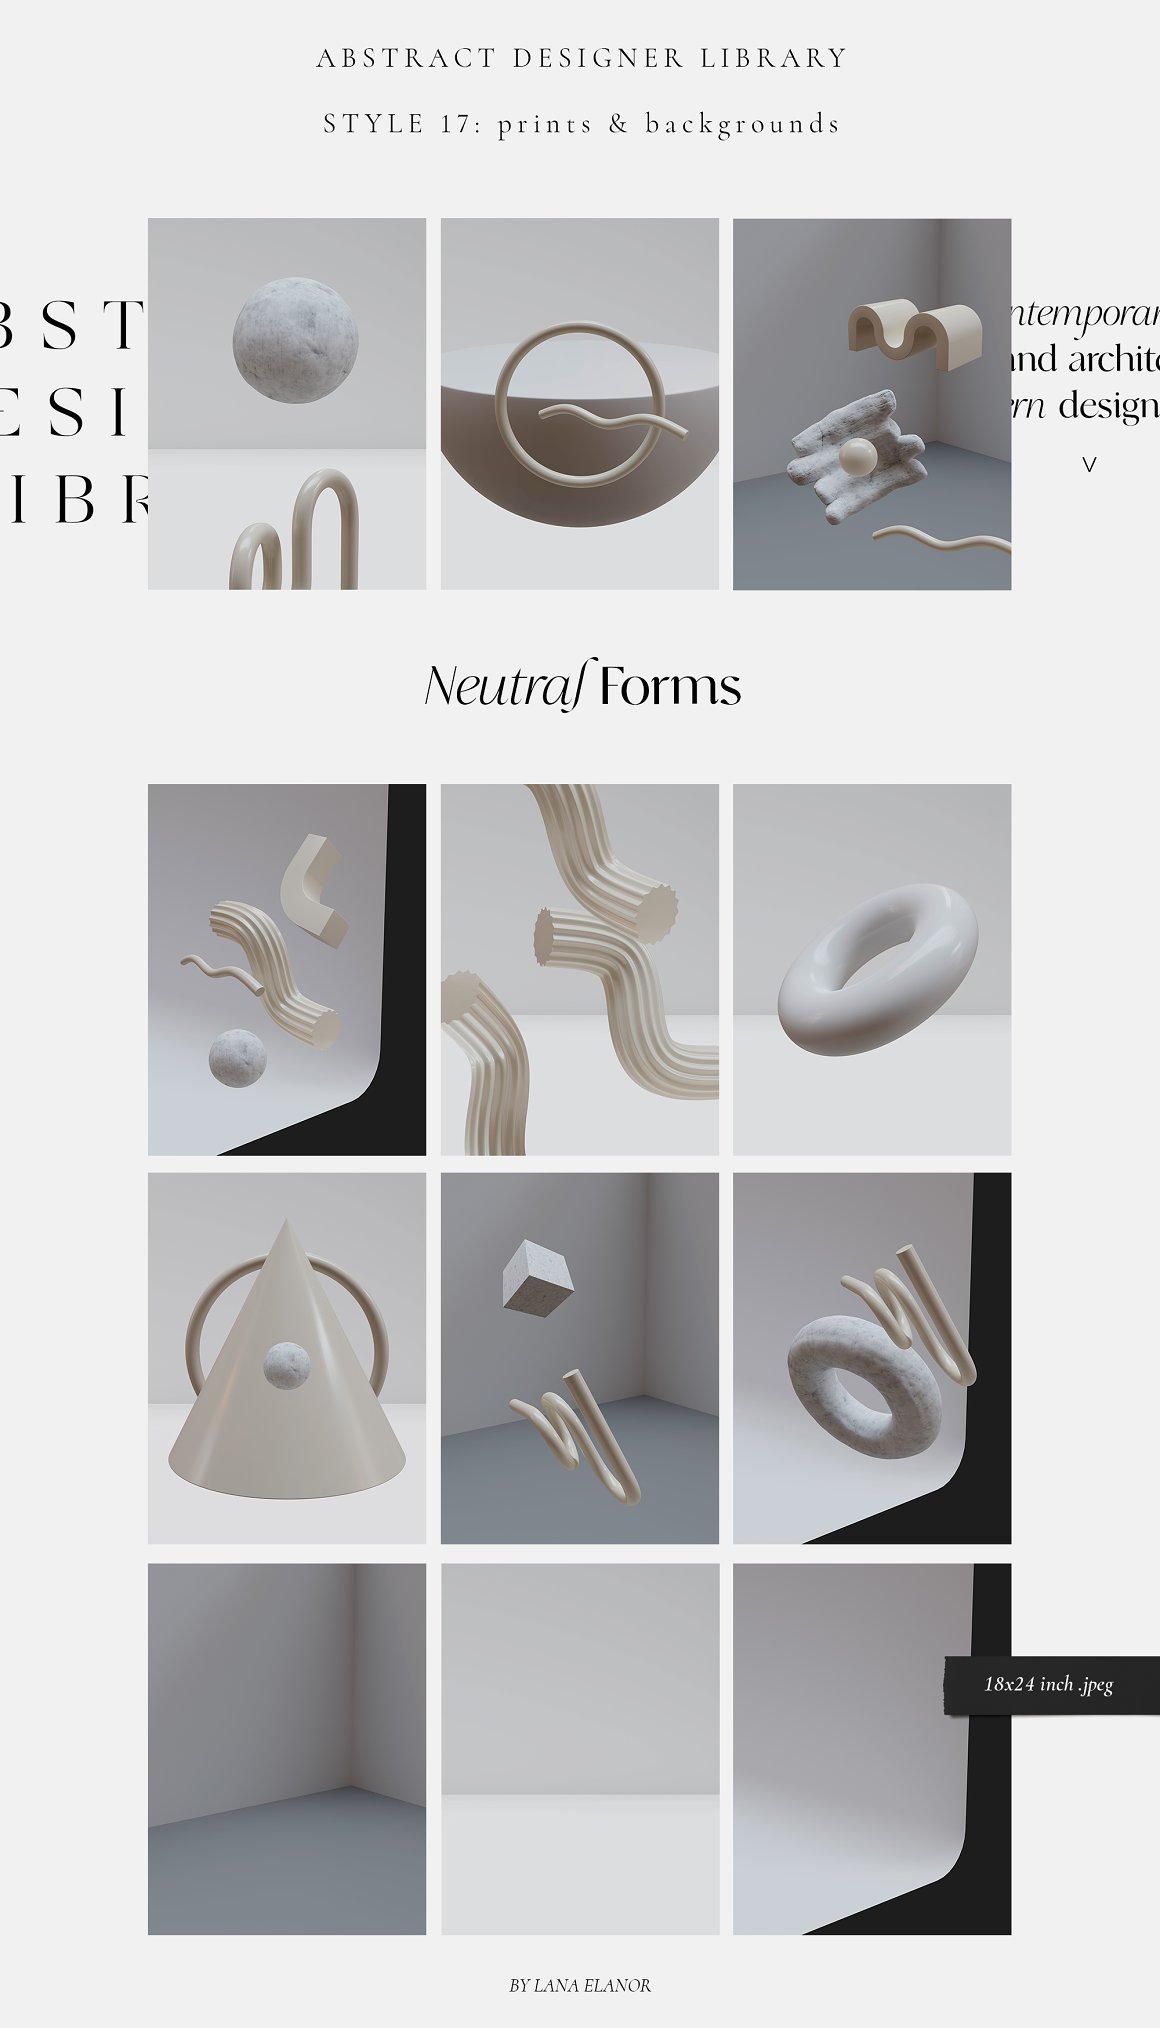 Neutral forms library on a gray background.